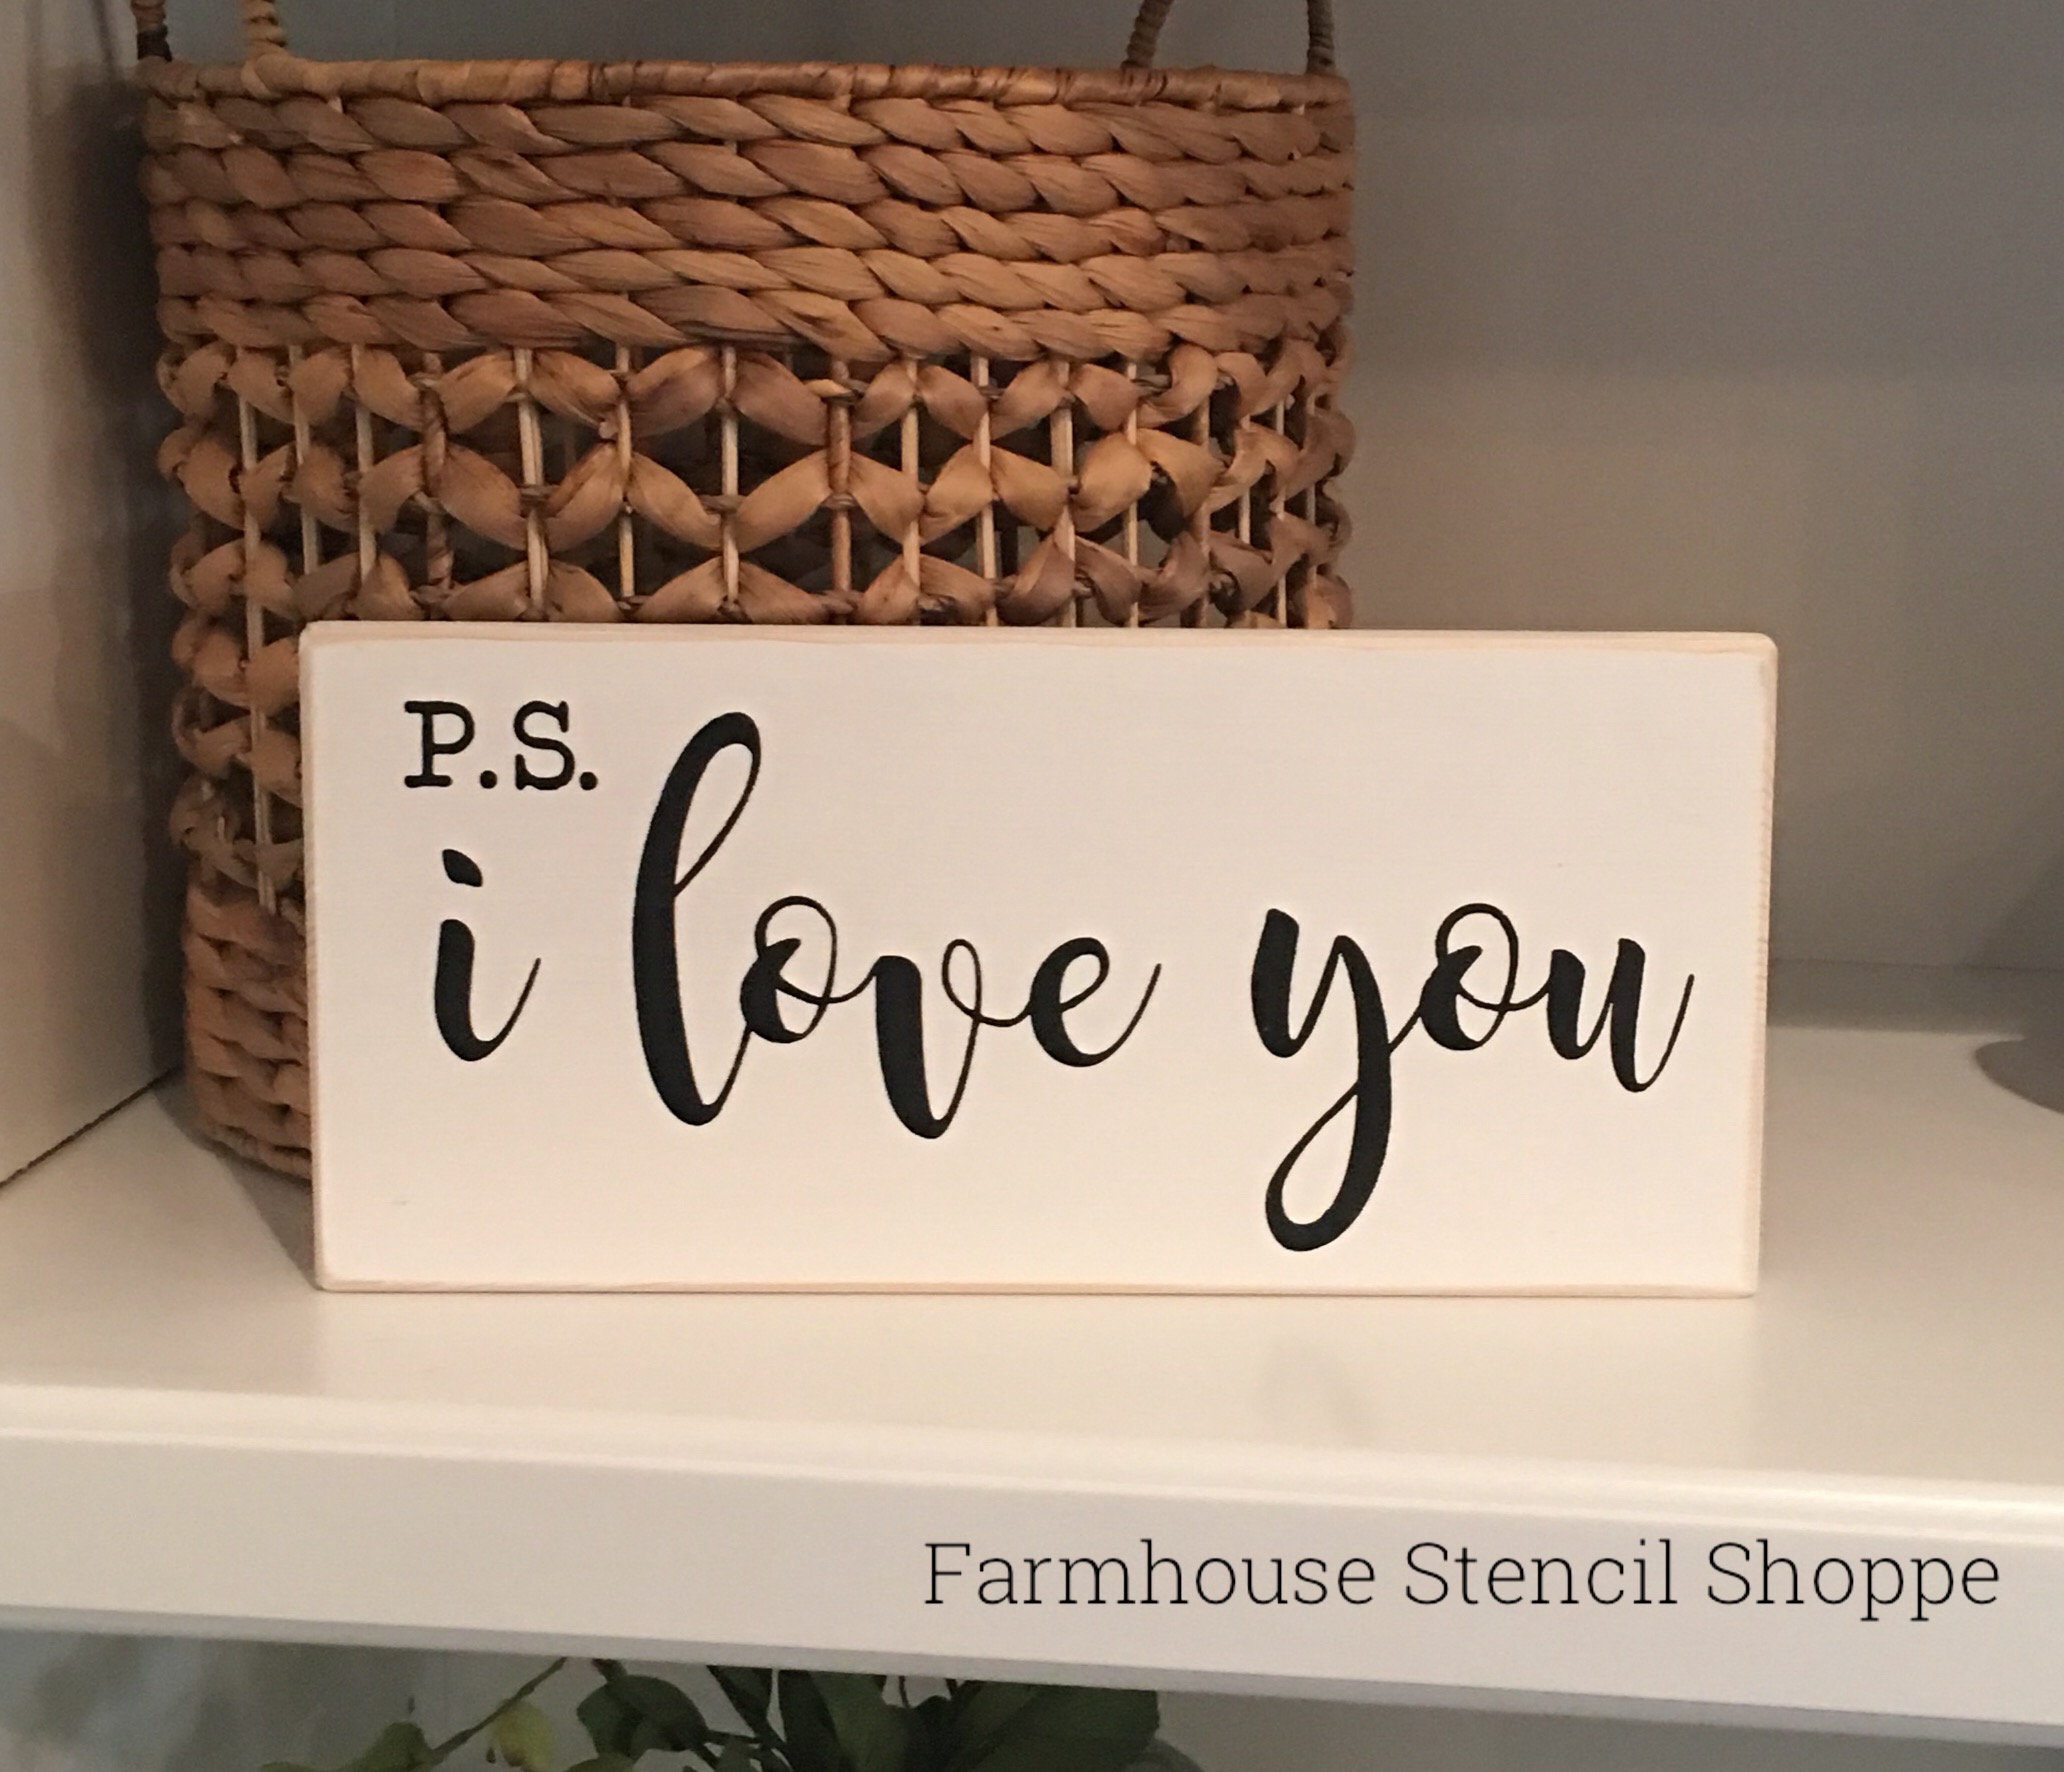 P.S. i love you, 12"x5.5"